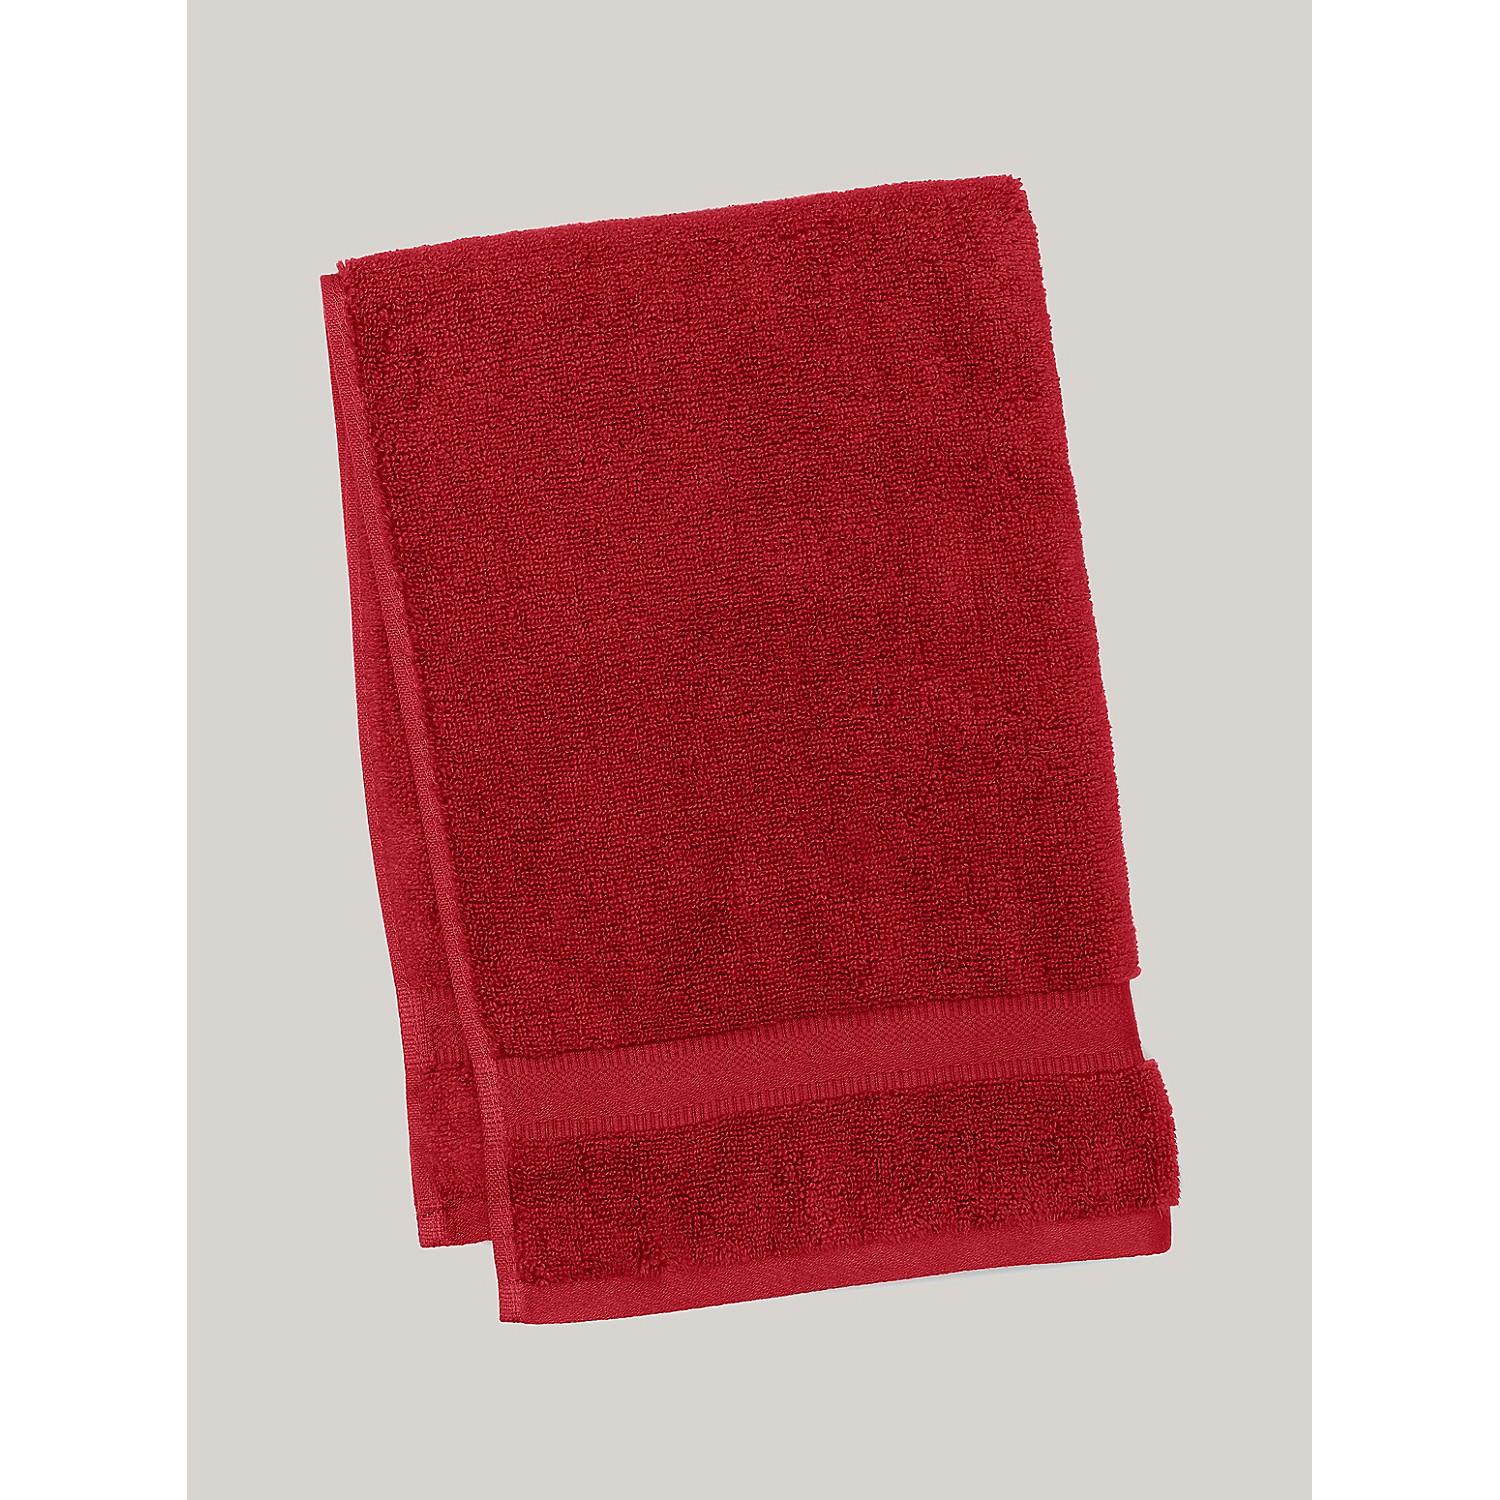 TOMMY HILFIGER Signature Solid Hand Towel in Biking Red